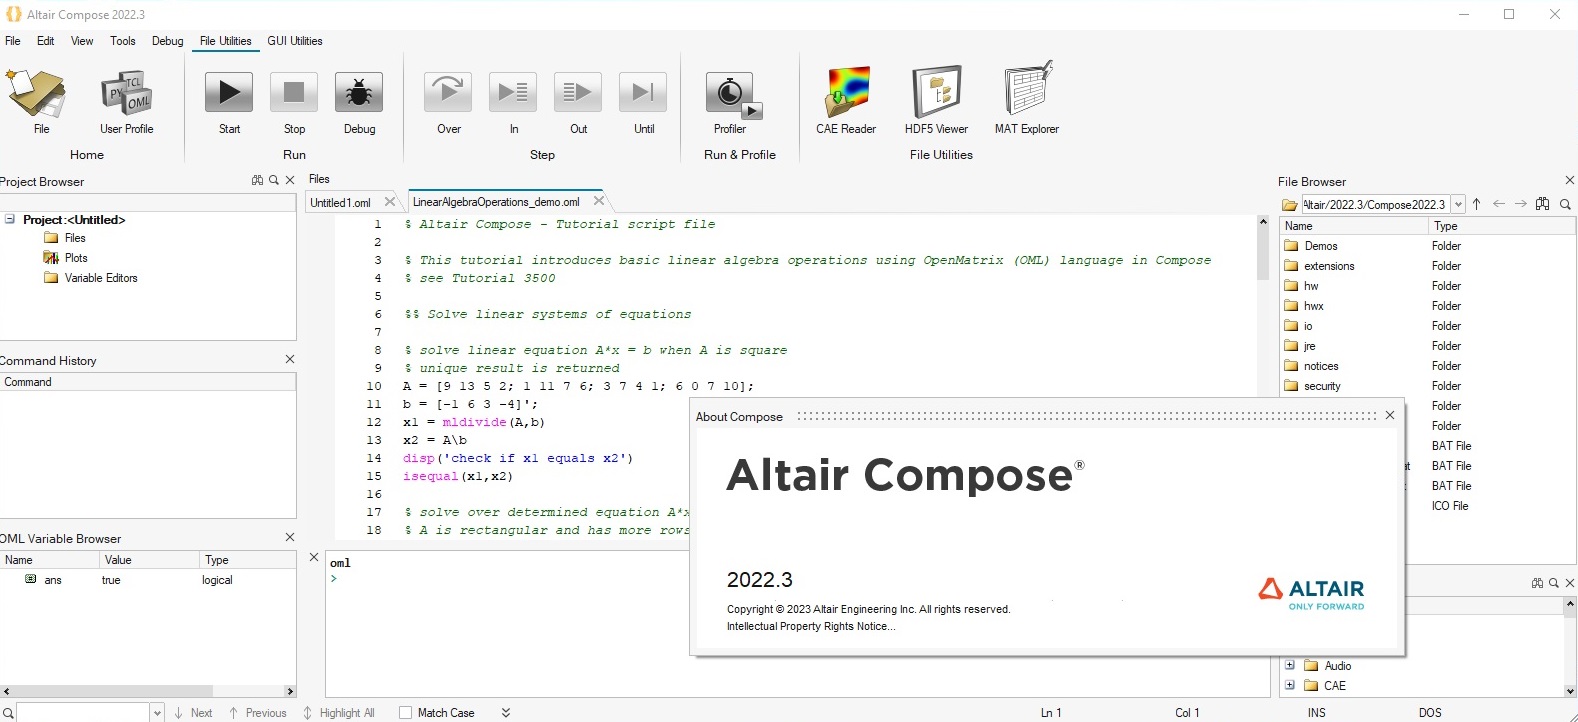 Working with Altair Compose 2022.3.0 full license